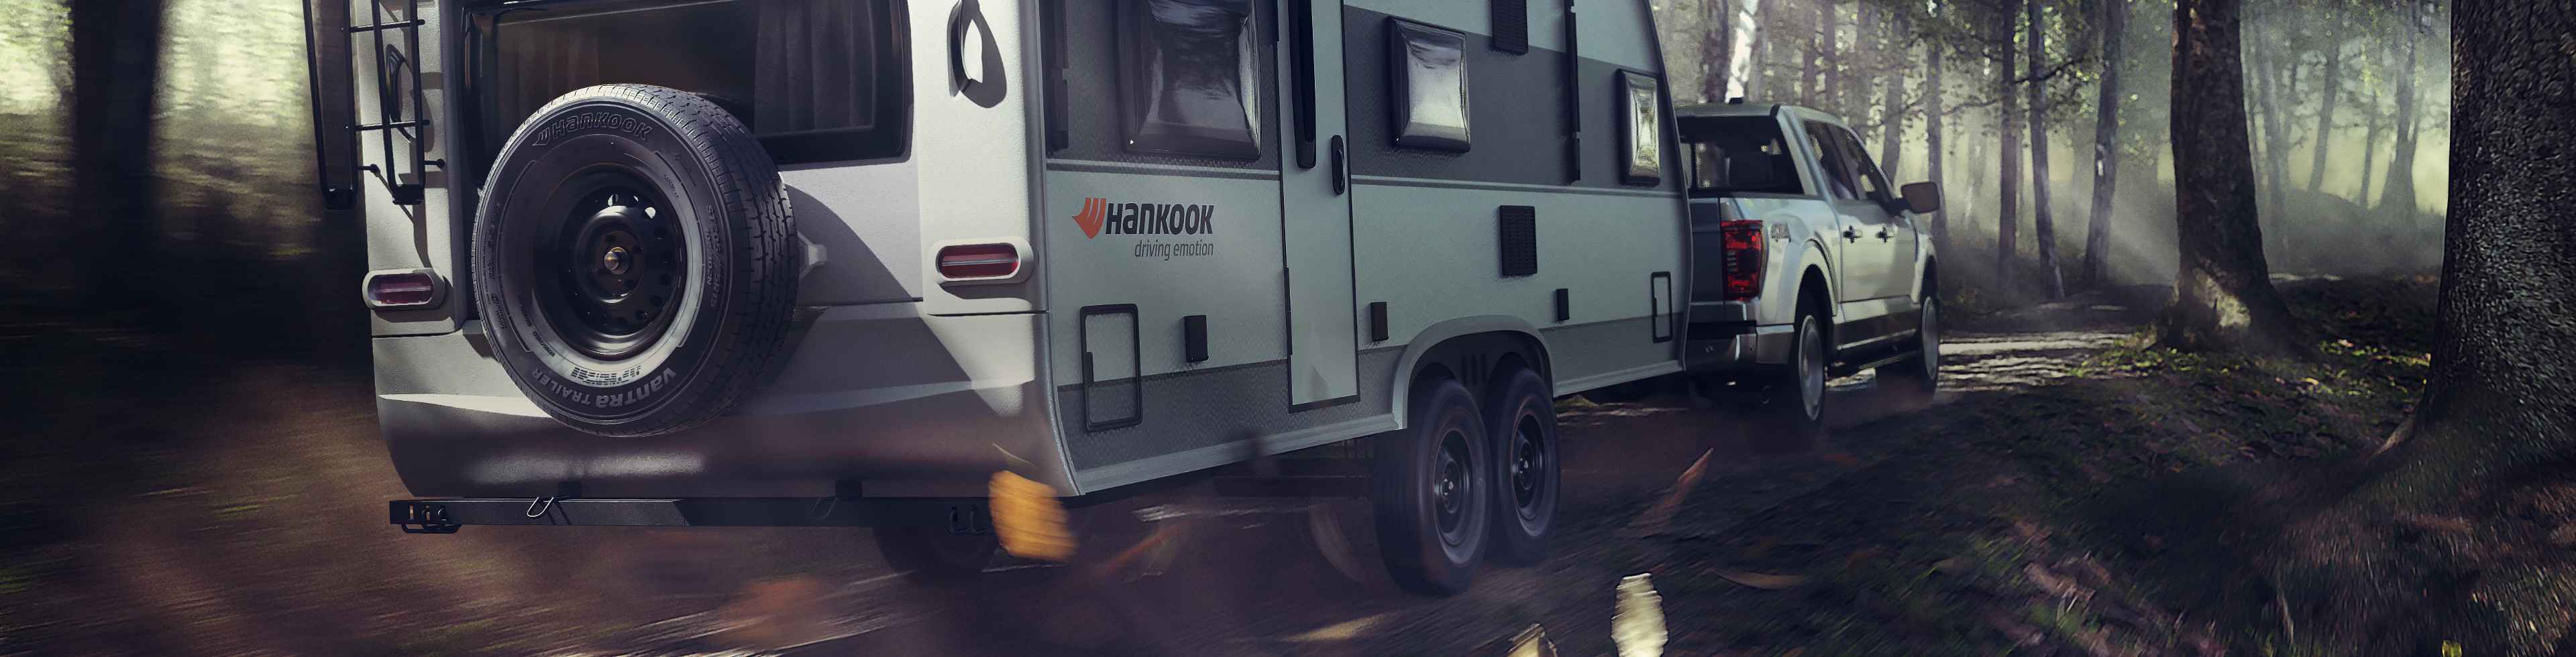 Vantra Tires - Search By US Family Hankook Product | Tire